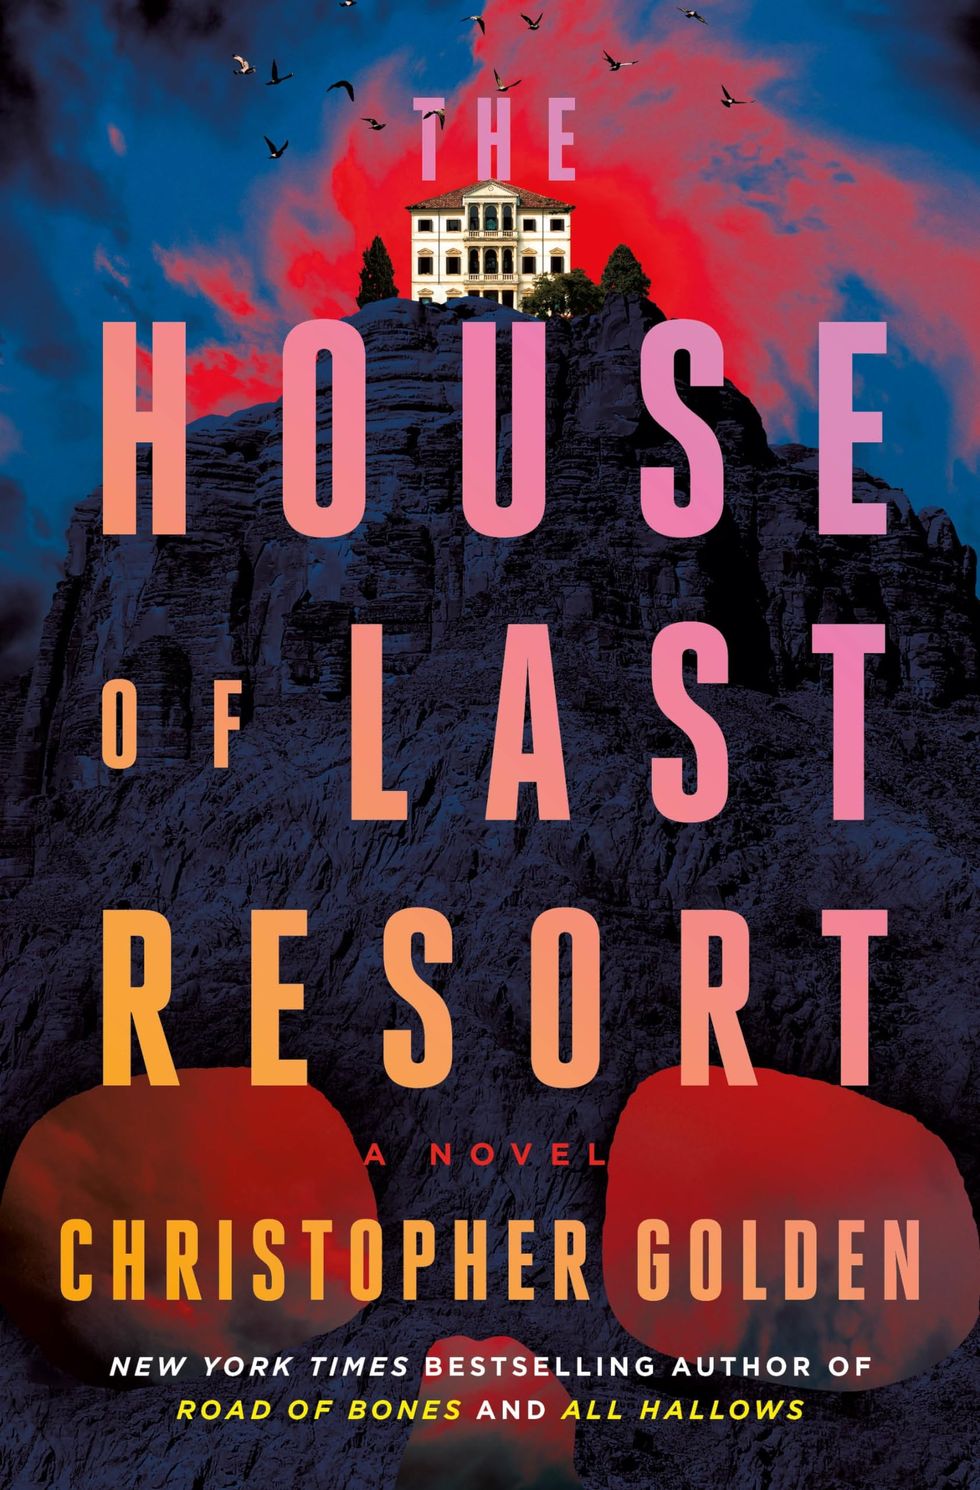 The House of Last Resort, by Christopher Golden